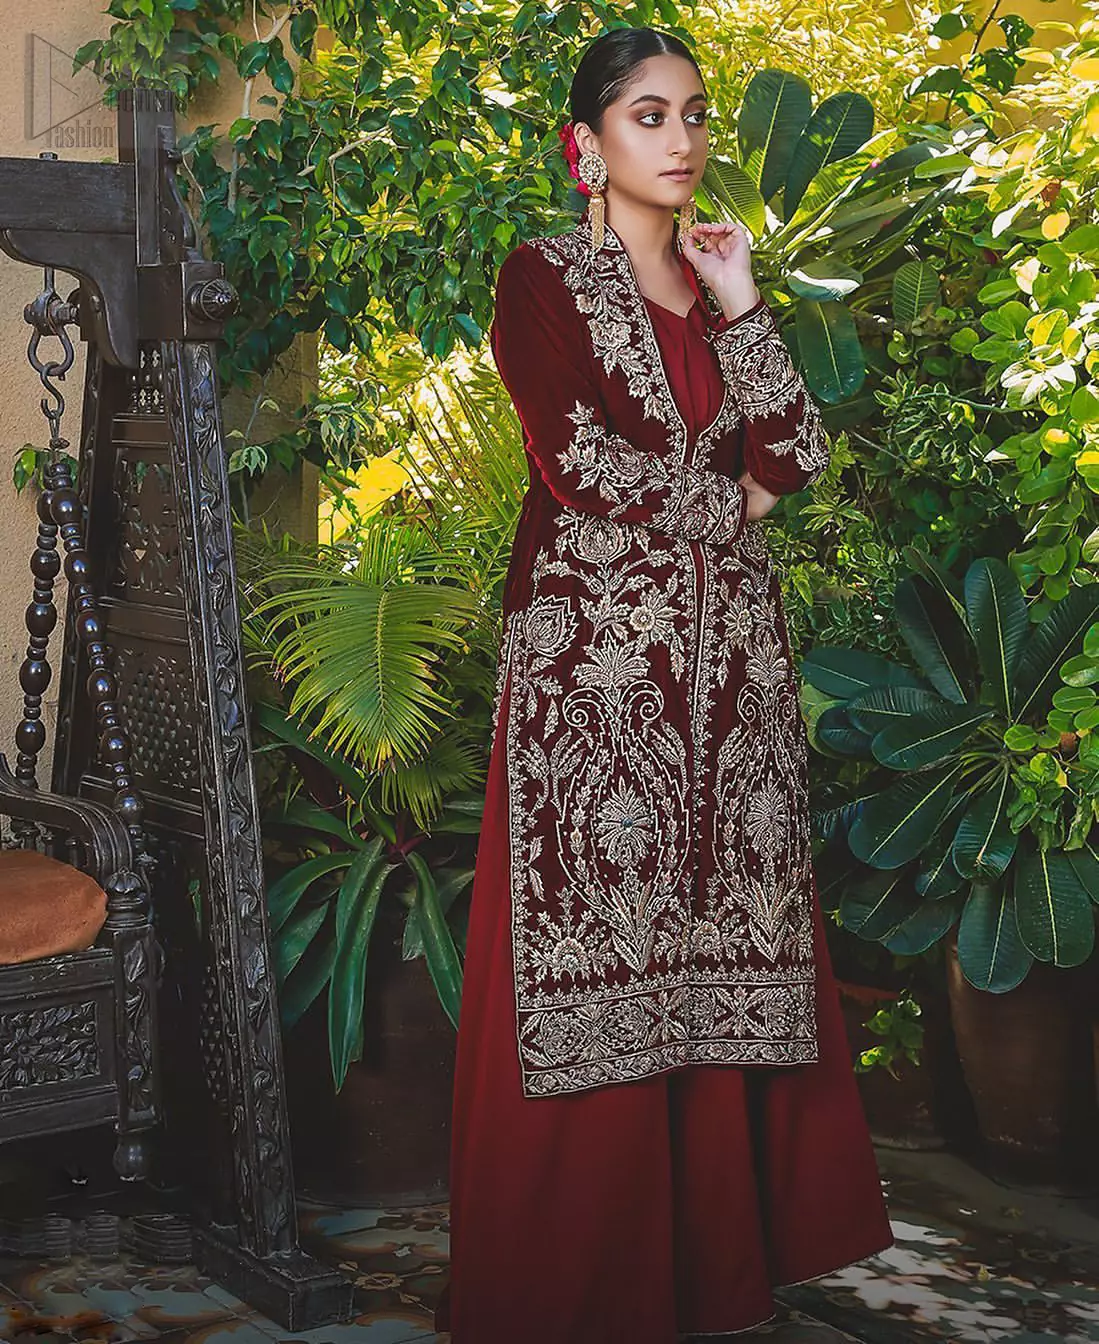 Steal the show with this endearing velvet outfit with intricate yet rich embroidery. The chic yet elegant front open shirt is decorated with embroidered patterns, embellished collar neckline and floral bunches. Hemline is even more enhanced with detailed zardozi work. The back of the shirt has a central large motif on the bodice while the zardozi work creates drama on both front and back panels. Beautifully paired up with maroon palazzo pants. Finish the look with maroon organza dupatta adorned with tiny floral motifs all over.